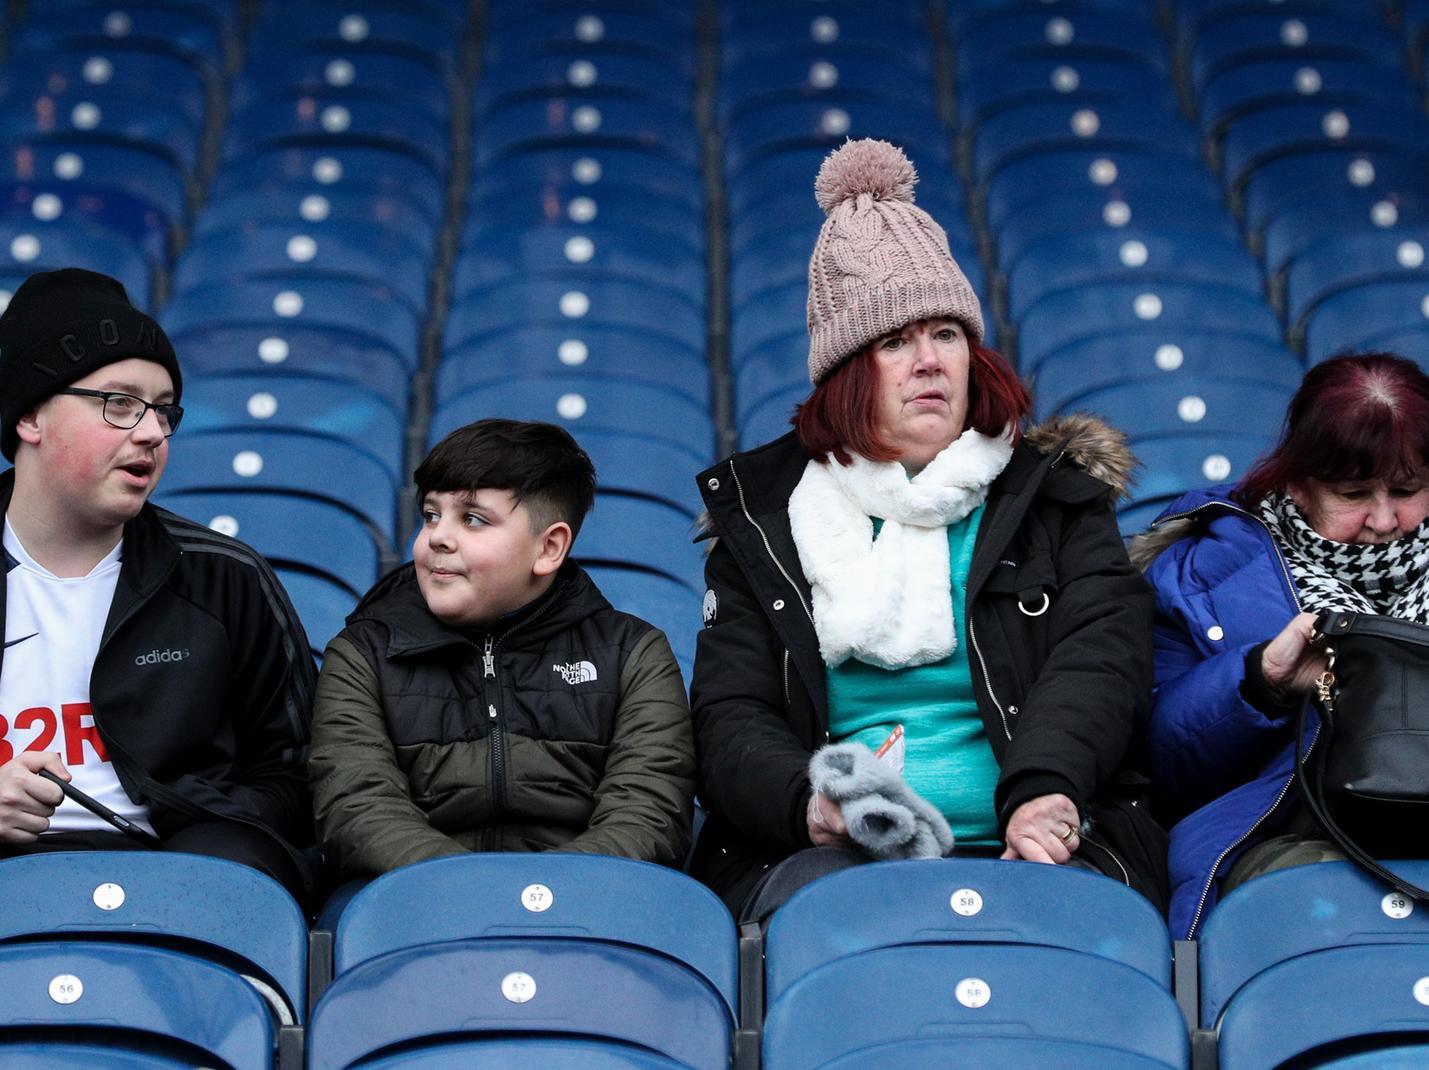 These Preston supporters take their seats early at Ewood Park